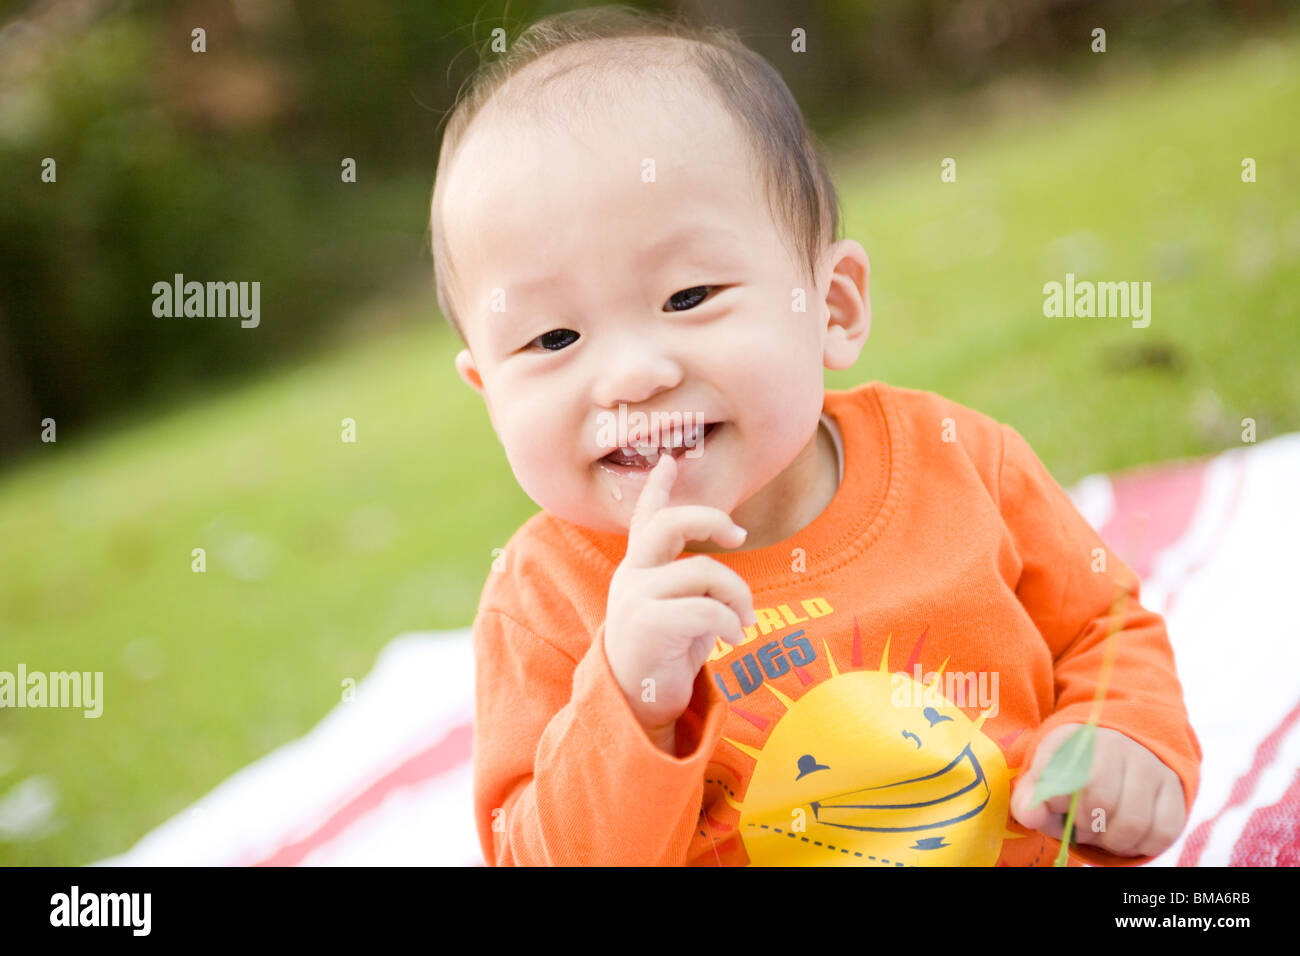 Smiling baby boy Banque D'Images